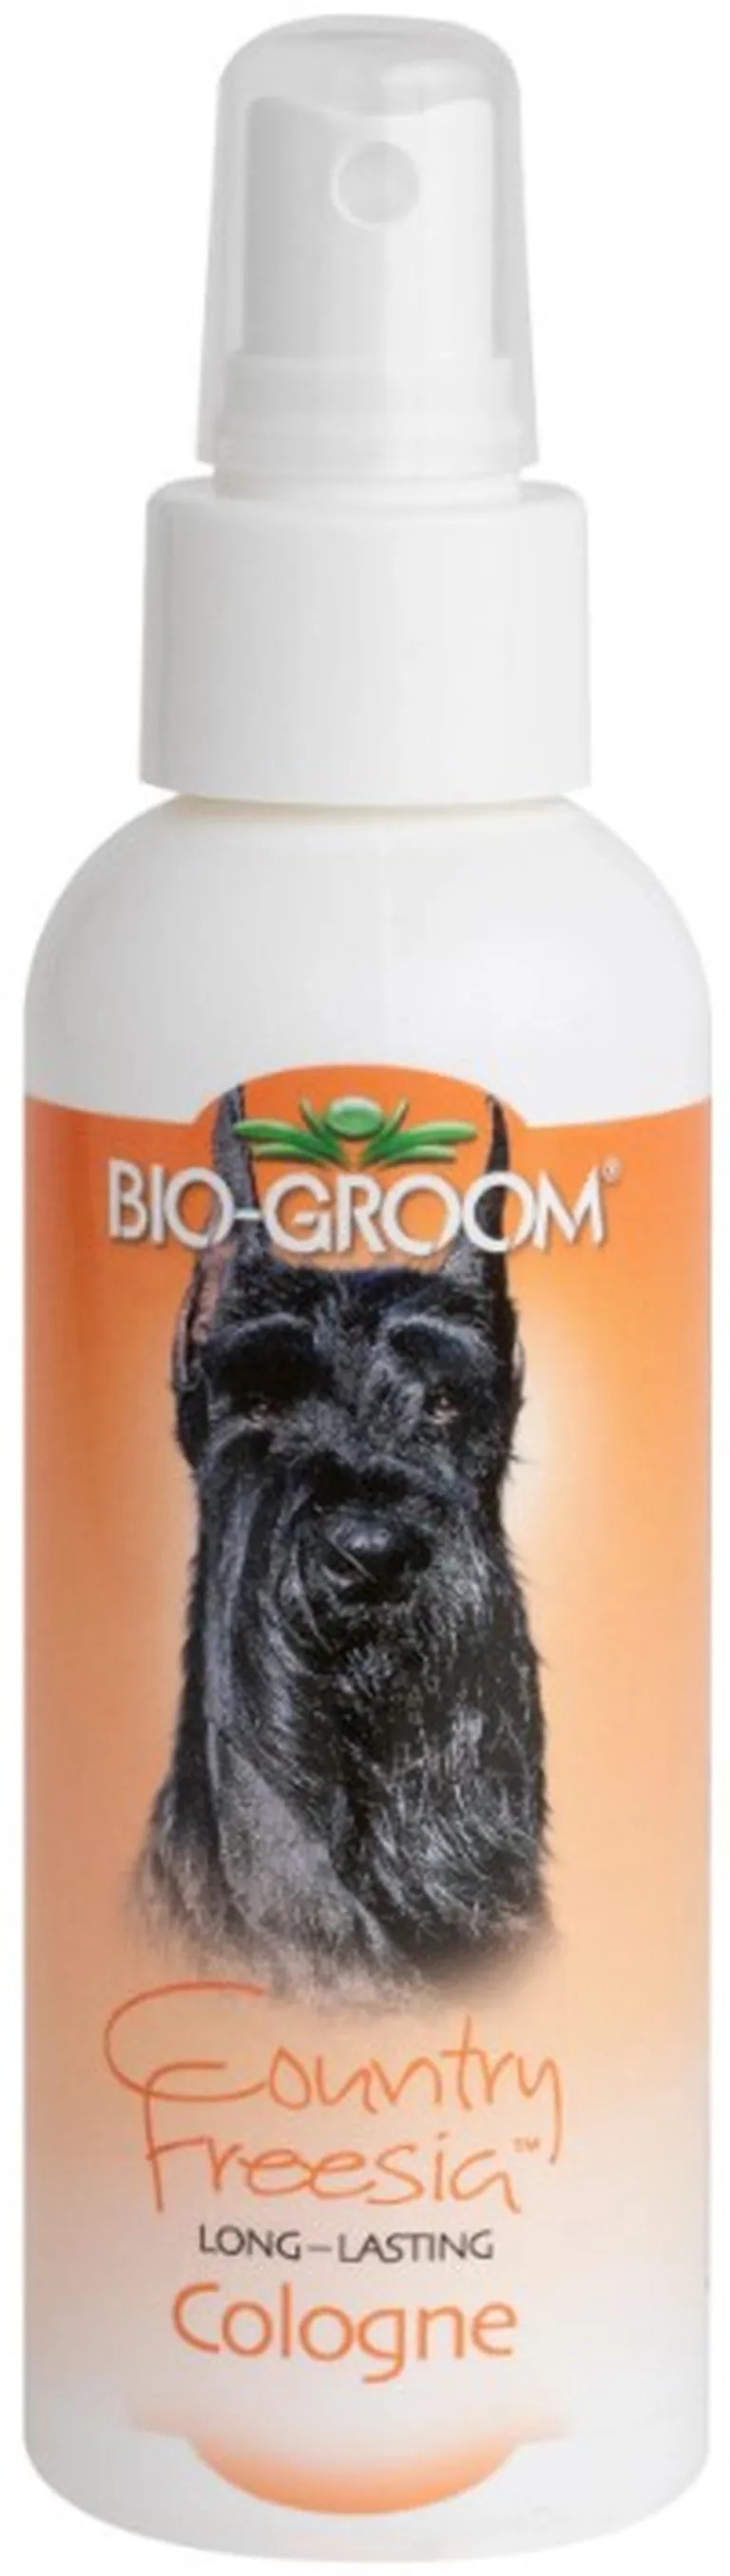 Bio Groom Natural Scents Country Freesia Cologne Photo 1